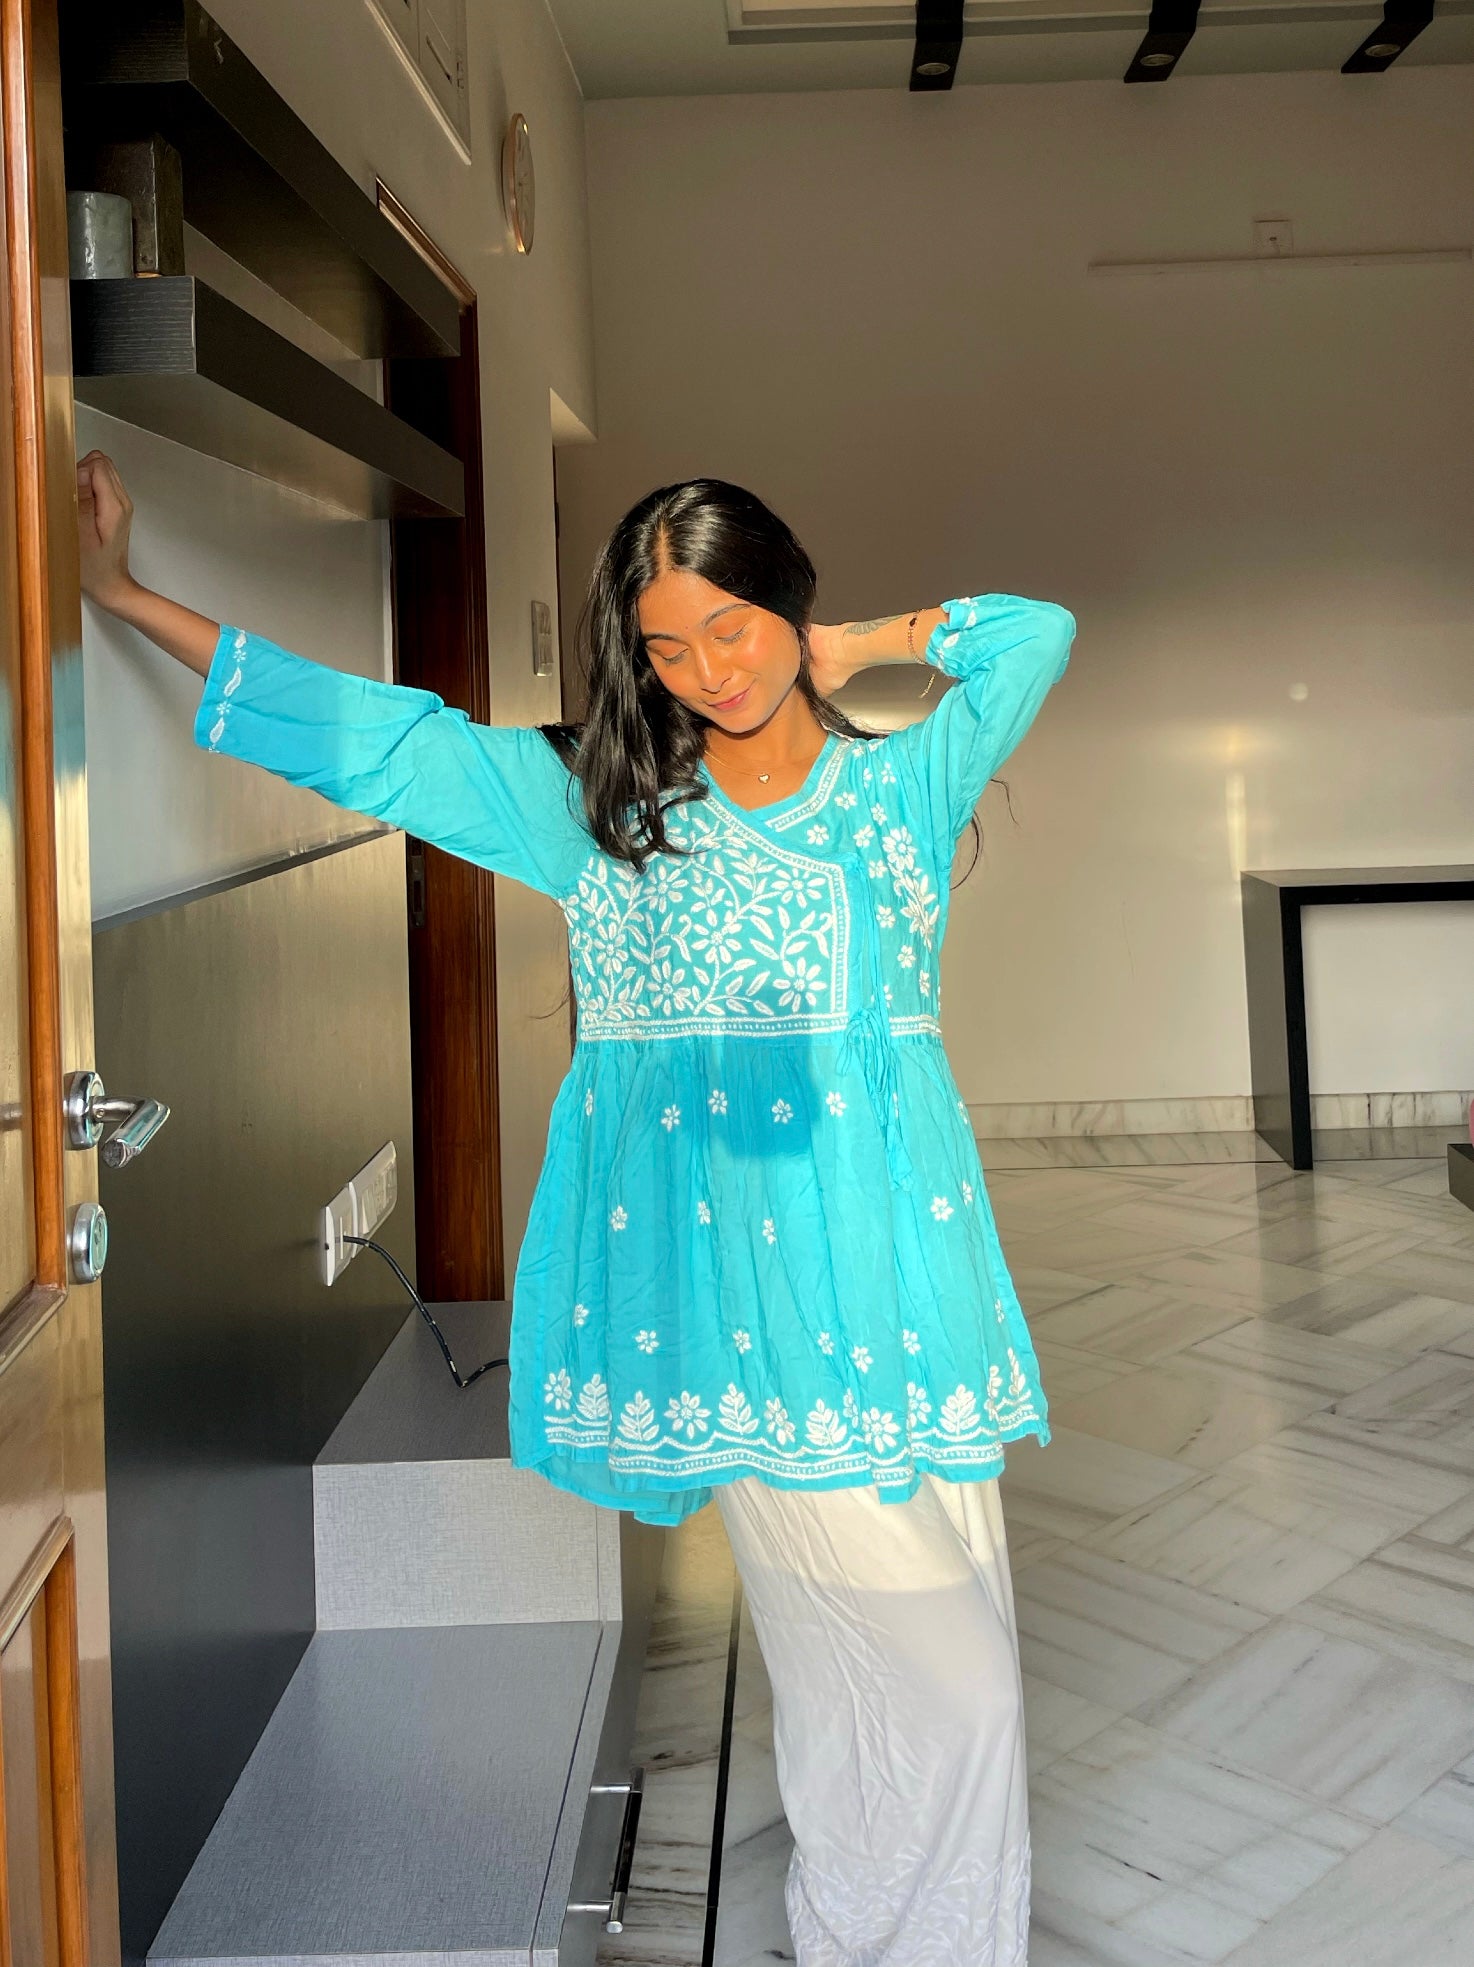 Short Kurti | Short kurti designs, Kurti designs, Kurti with jeans